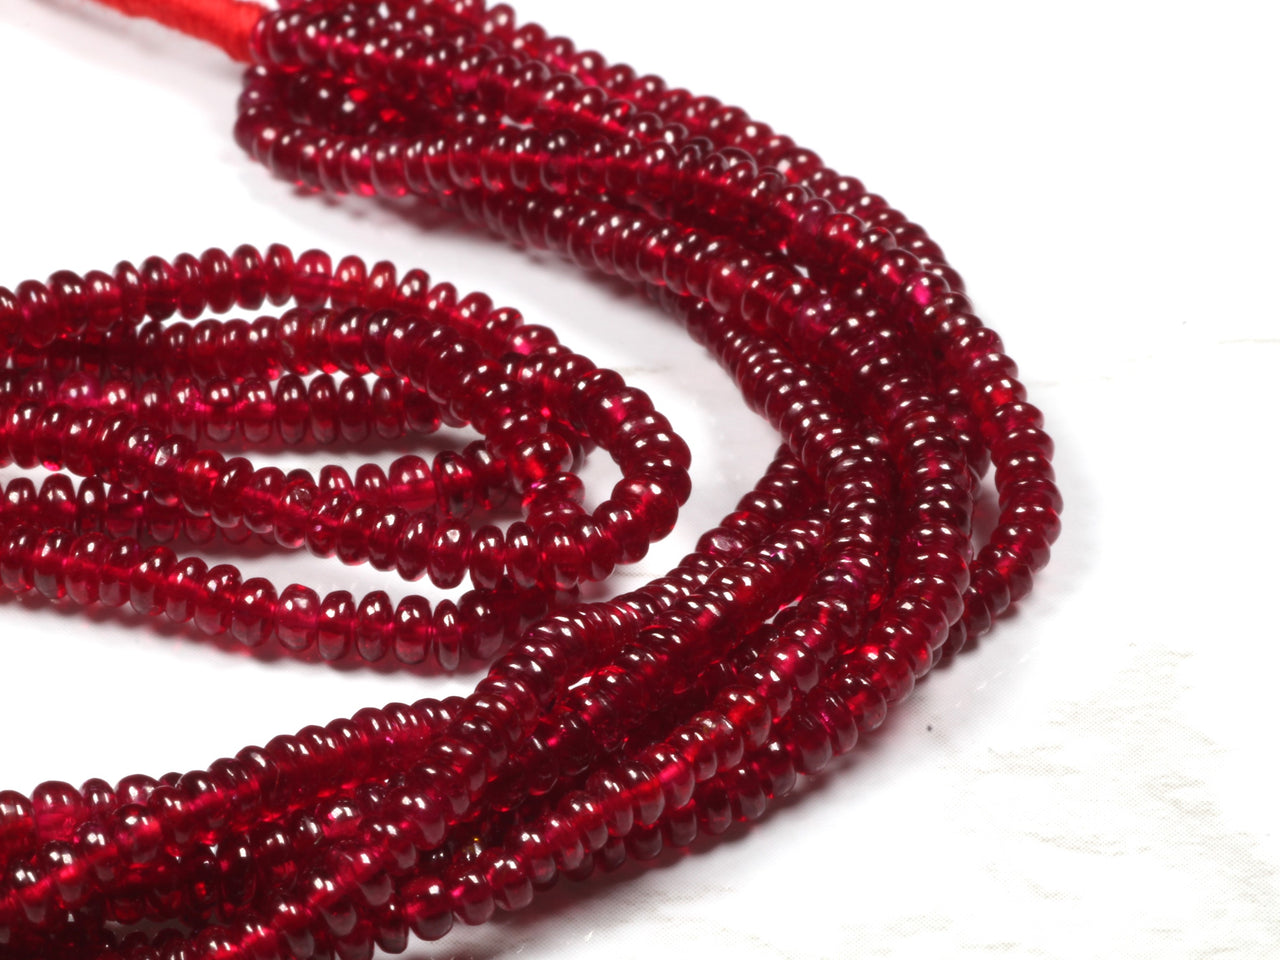 AAA Red Ruby 3mm Smooth Rondelles Bead Strand